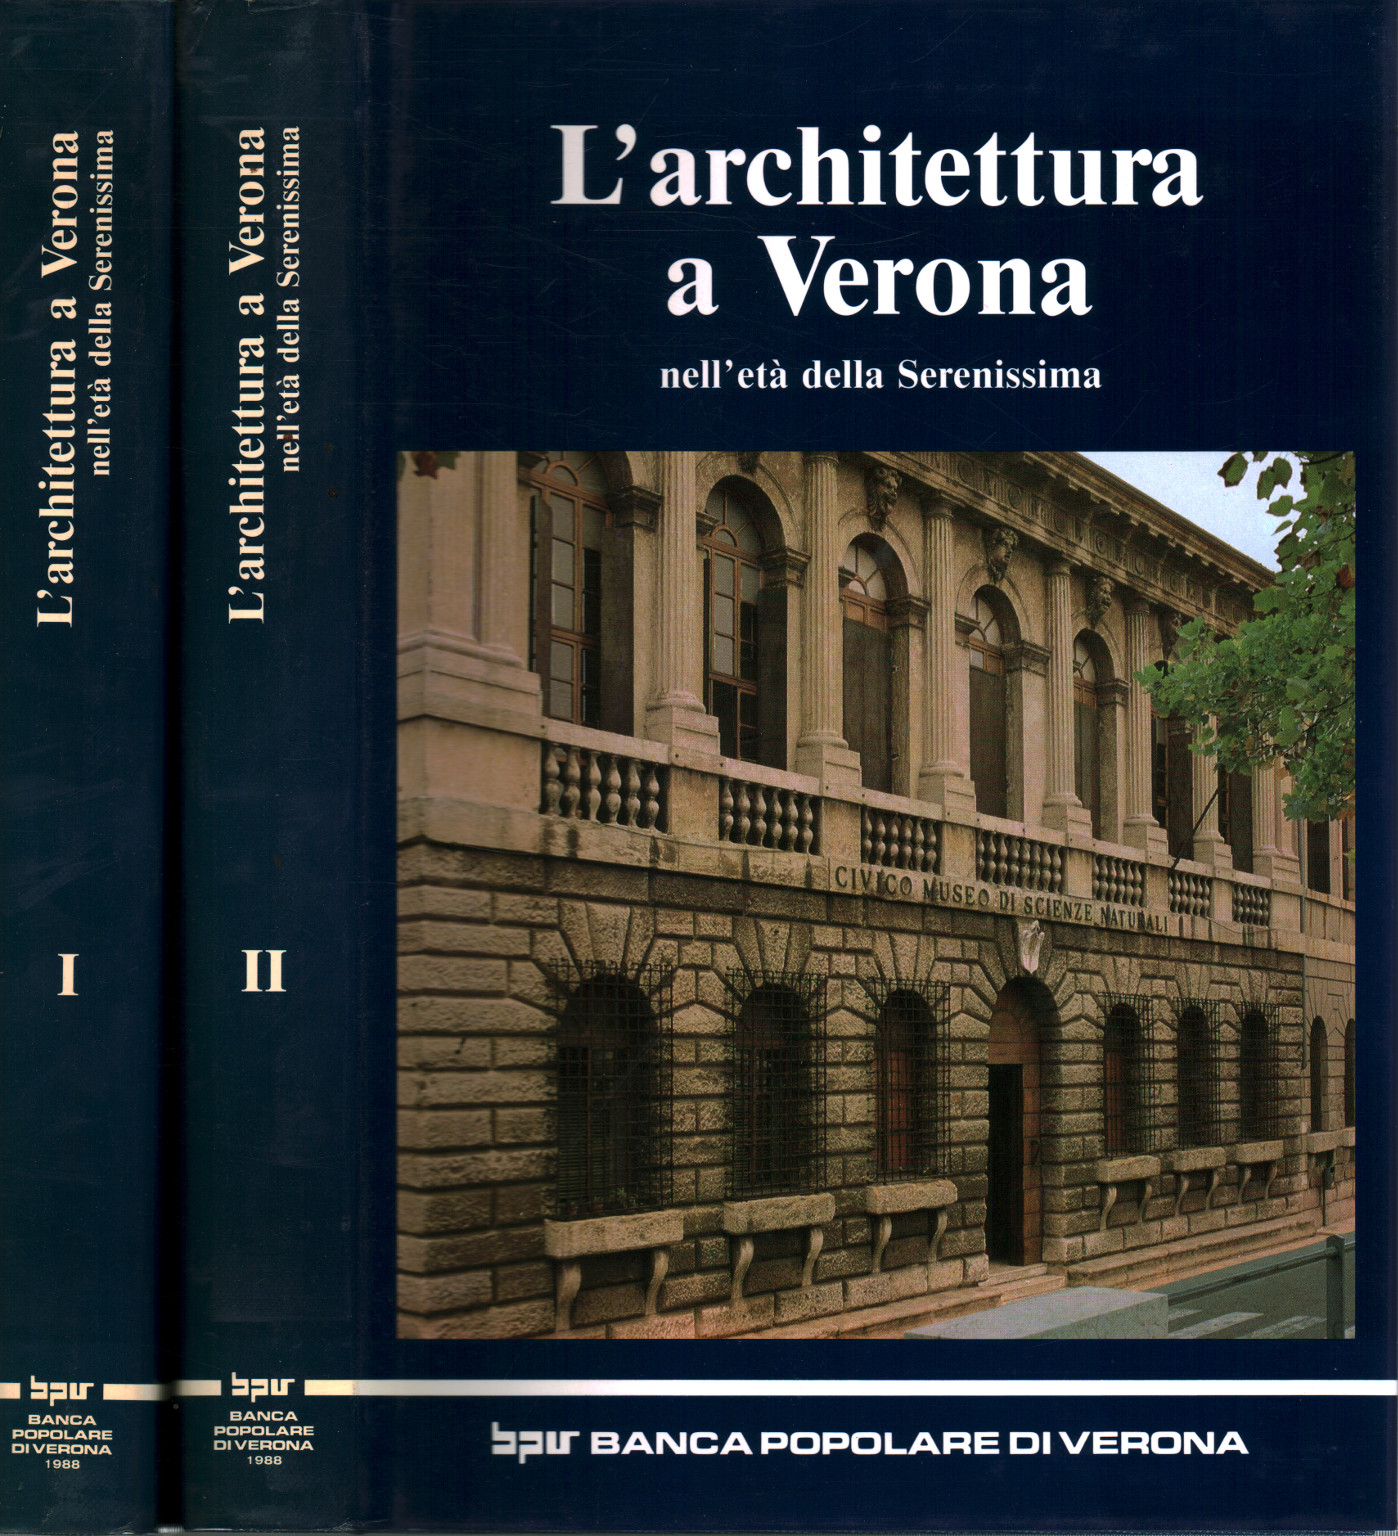 Architecture in Verona in the age of the Serenissim, s.a.